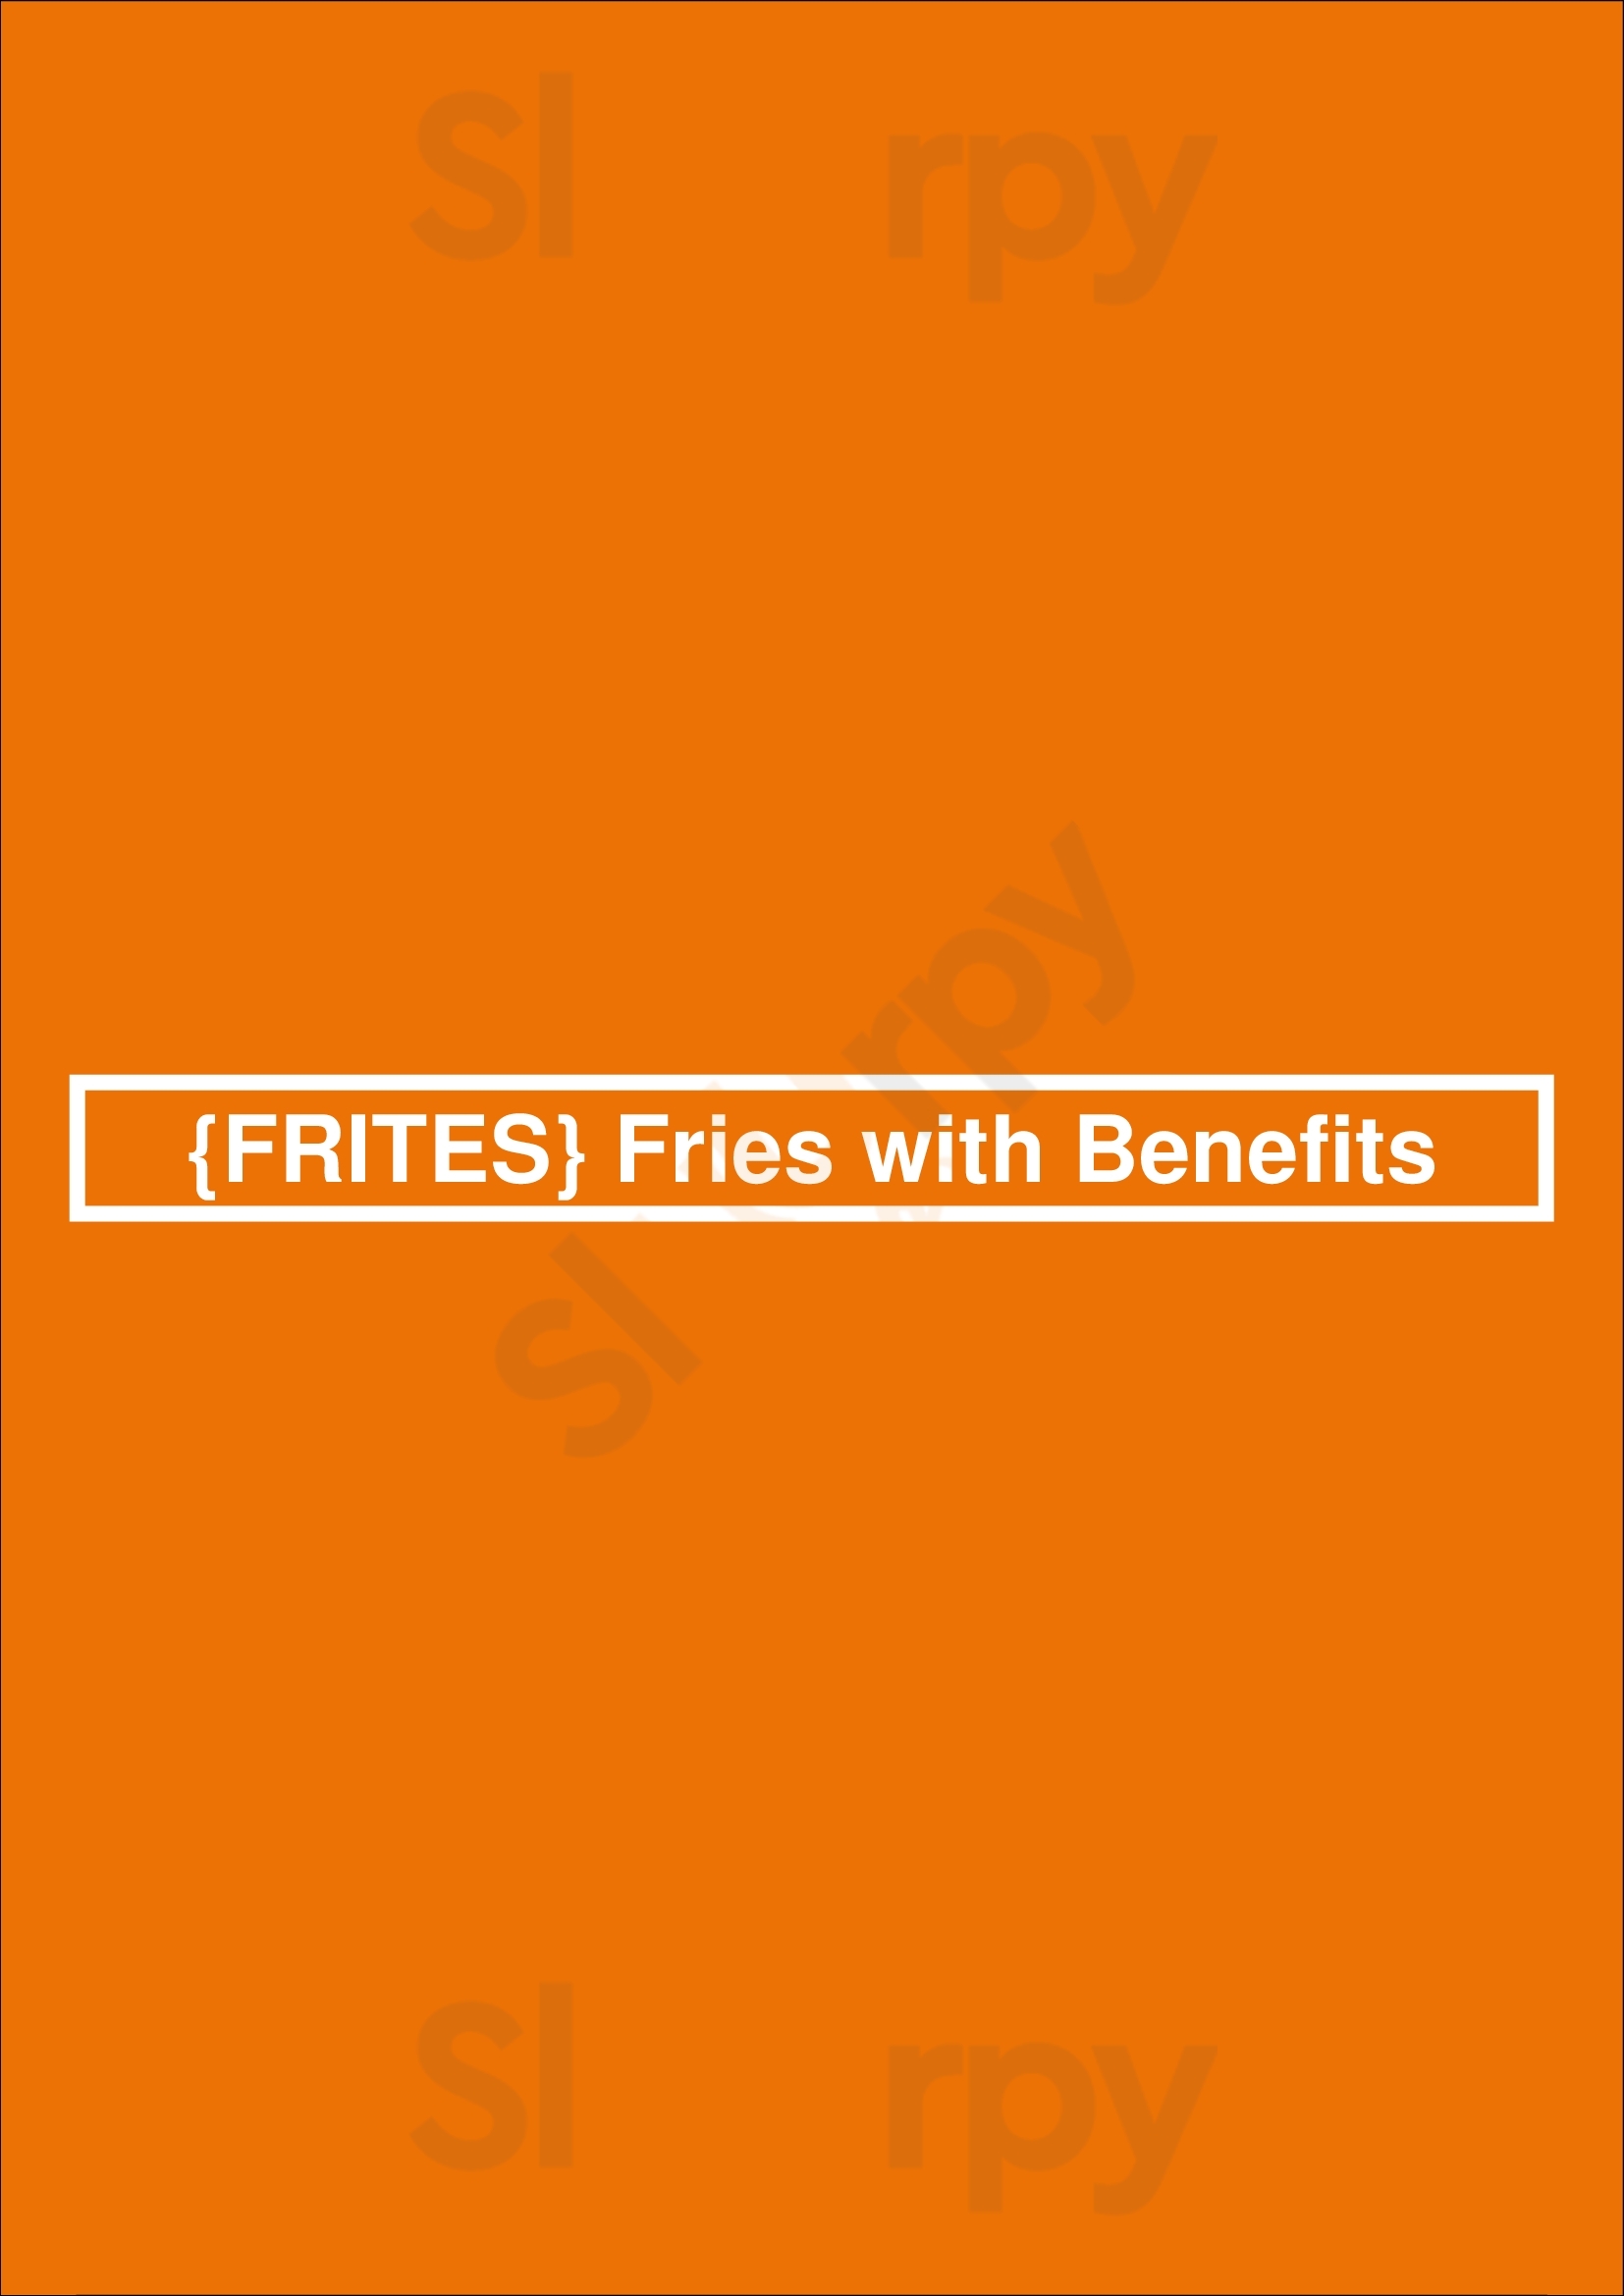 {frites} Fries With Benefits Vancouver Menu - 1